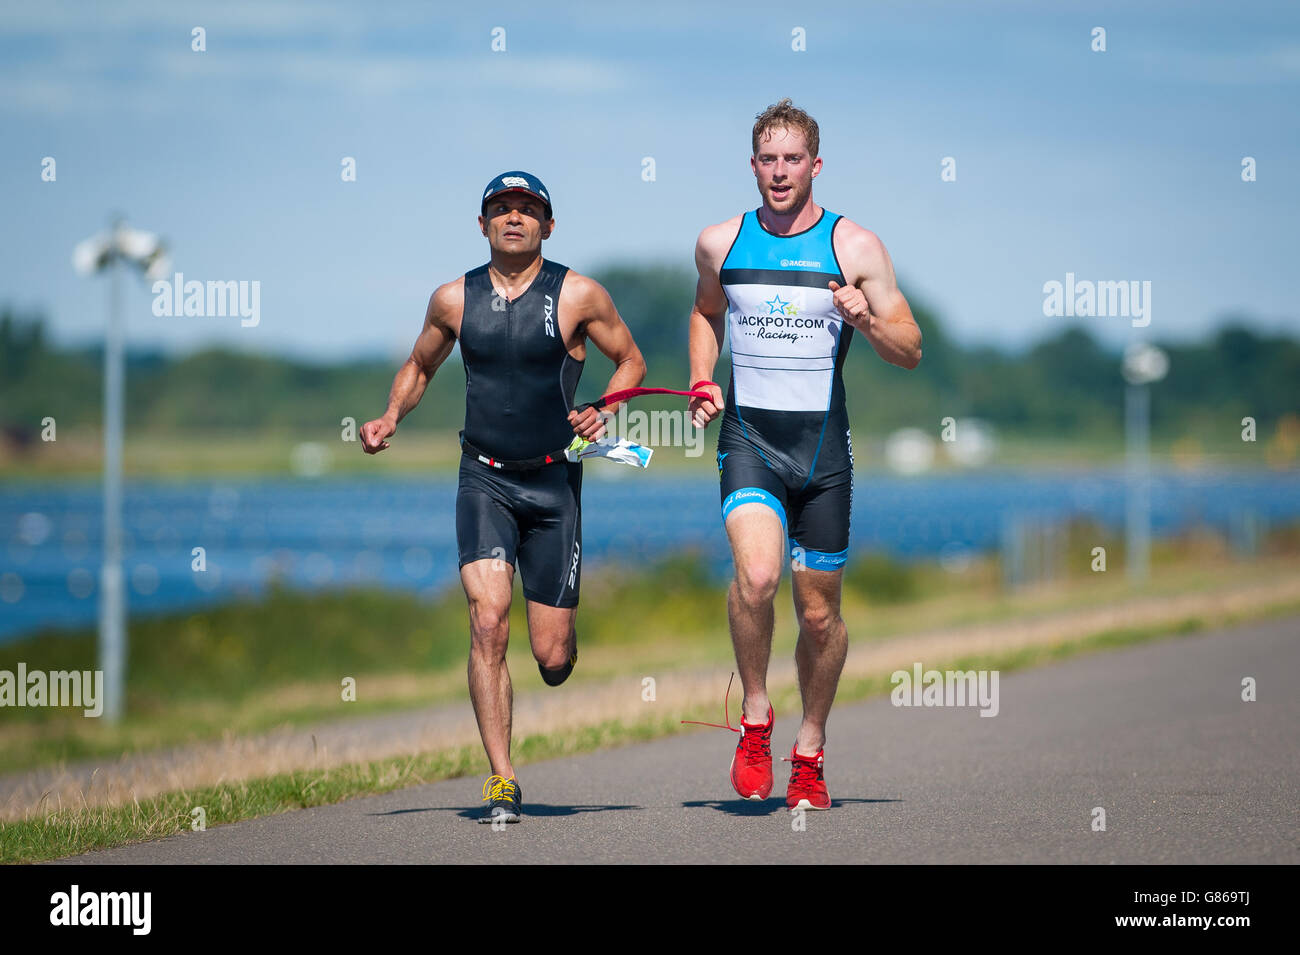 Haseeb Ahmad (left) competes in the Para Tri Elite race during the Para Tri Series at Dorney Lake, Windsor. Stock Photo